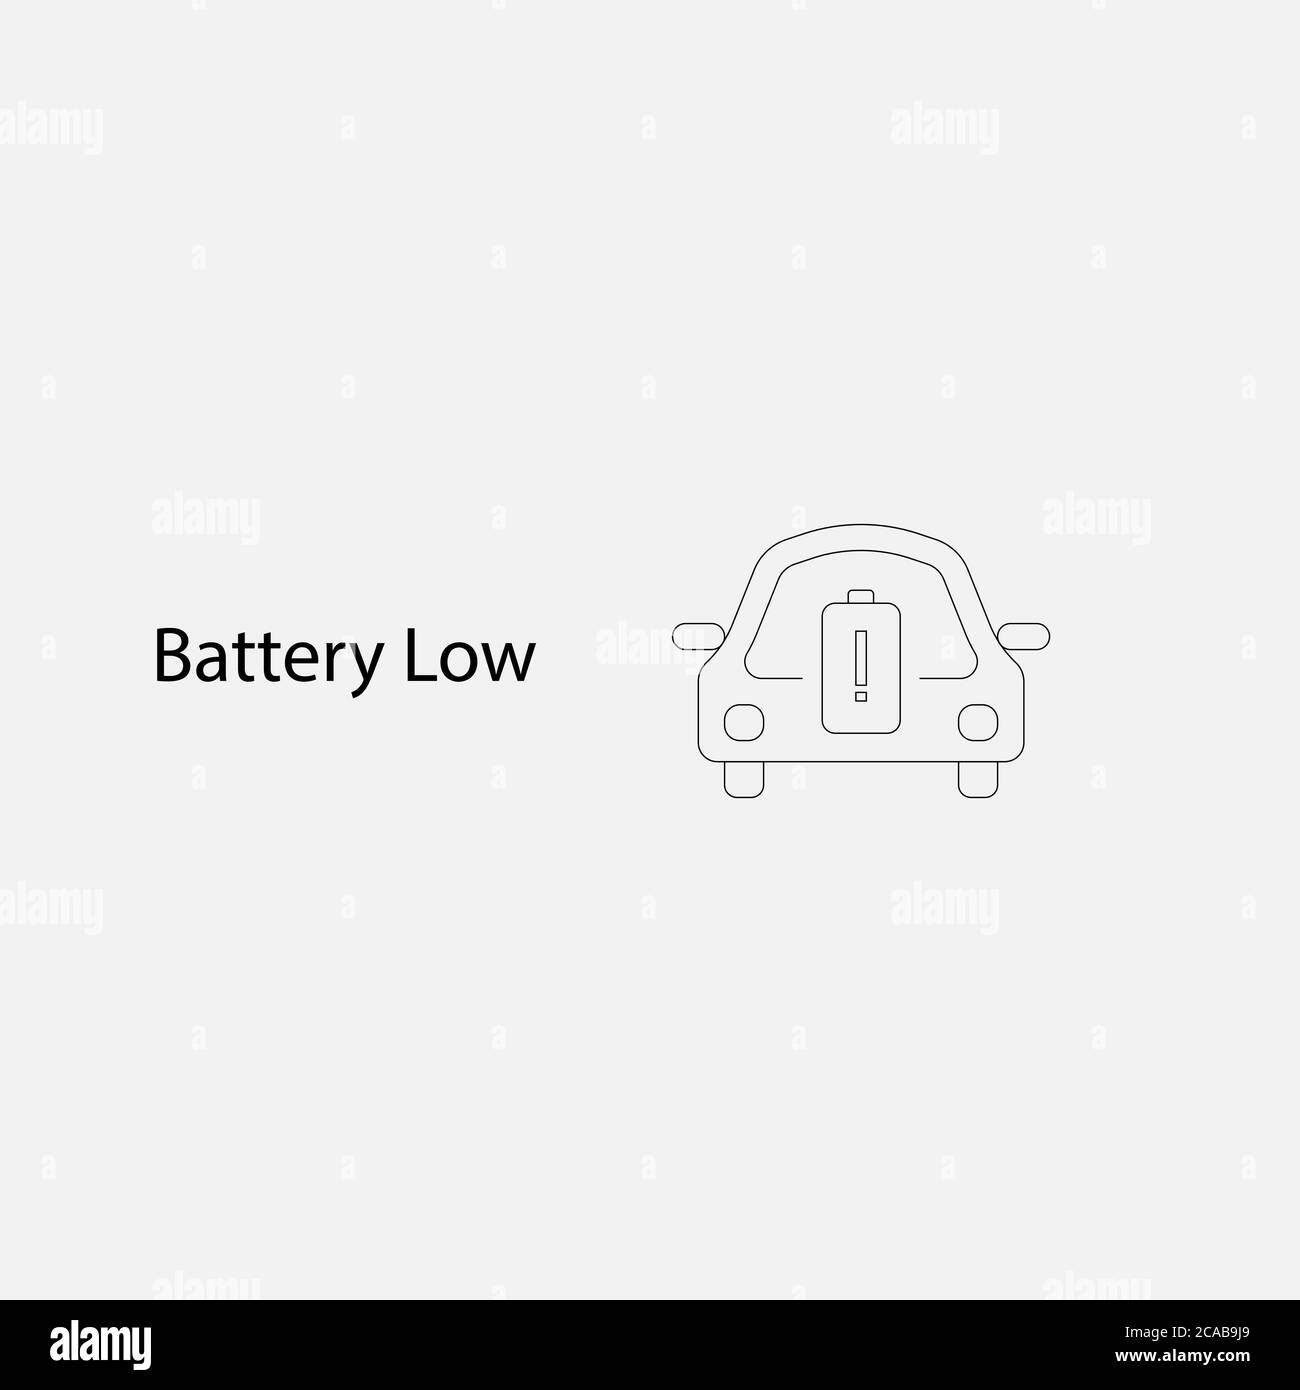 BEV,EV,Battery Electric Vehicle Icon.Electric car icon and charger station. Battery power plug.Home Charging.Solid State Battery.Home Link Devices.Cab Stock Vector